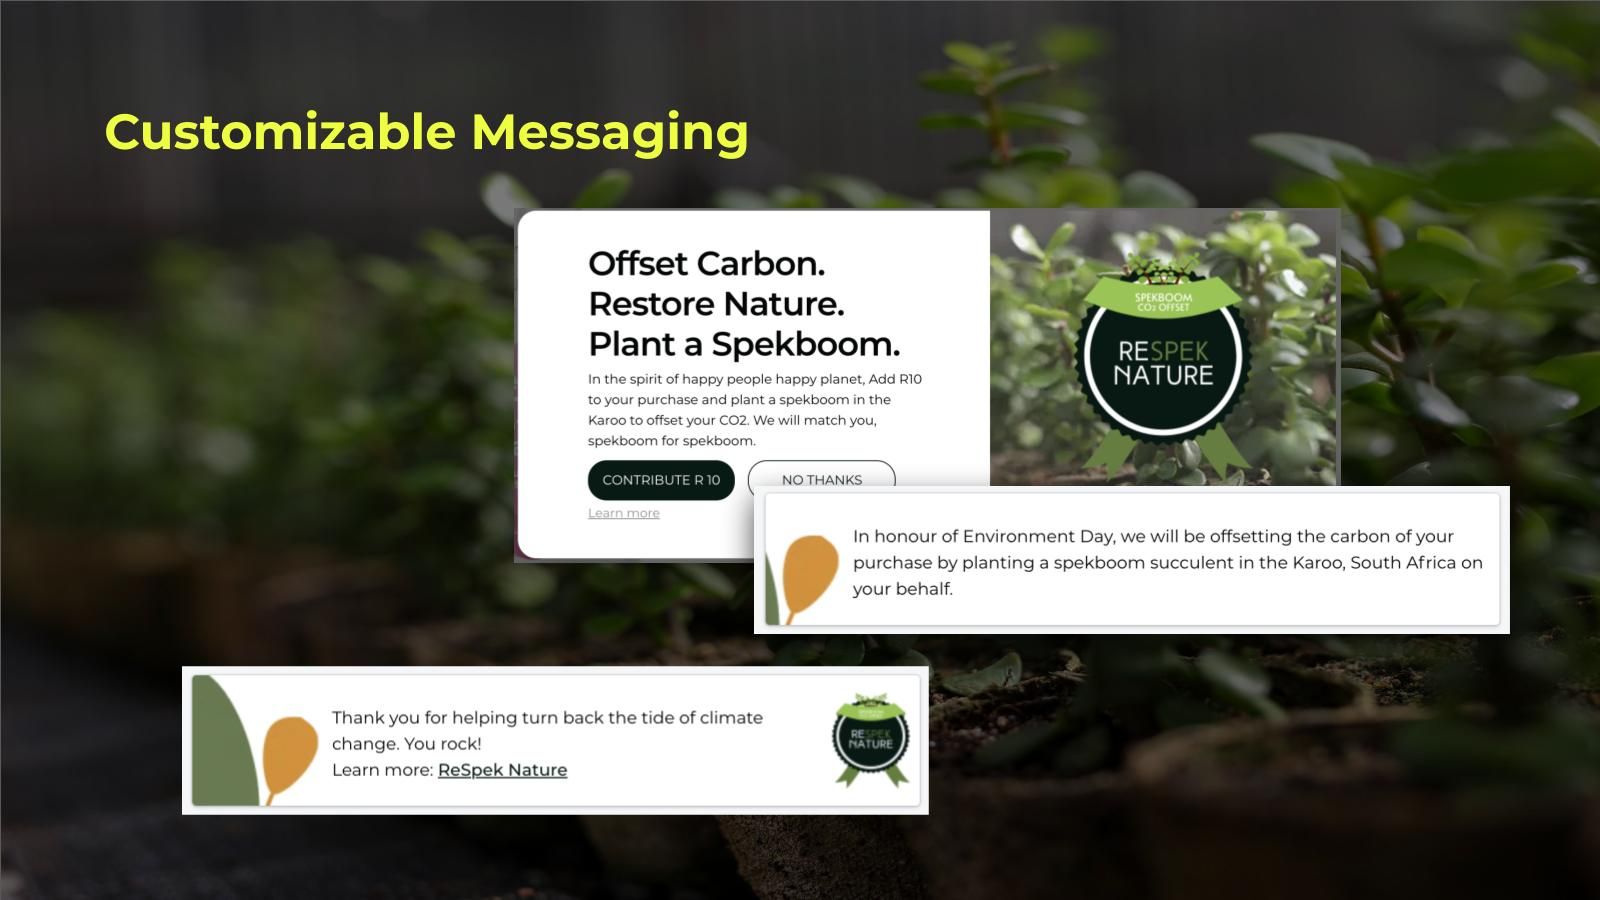 Customisable messaging